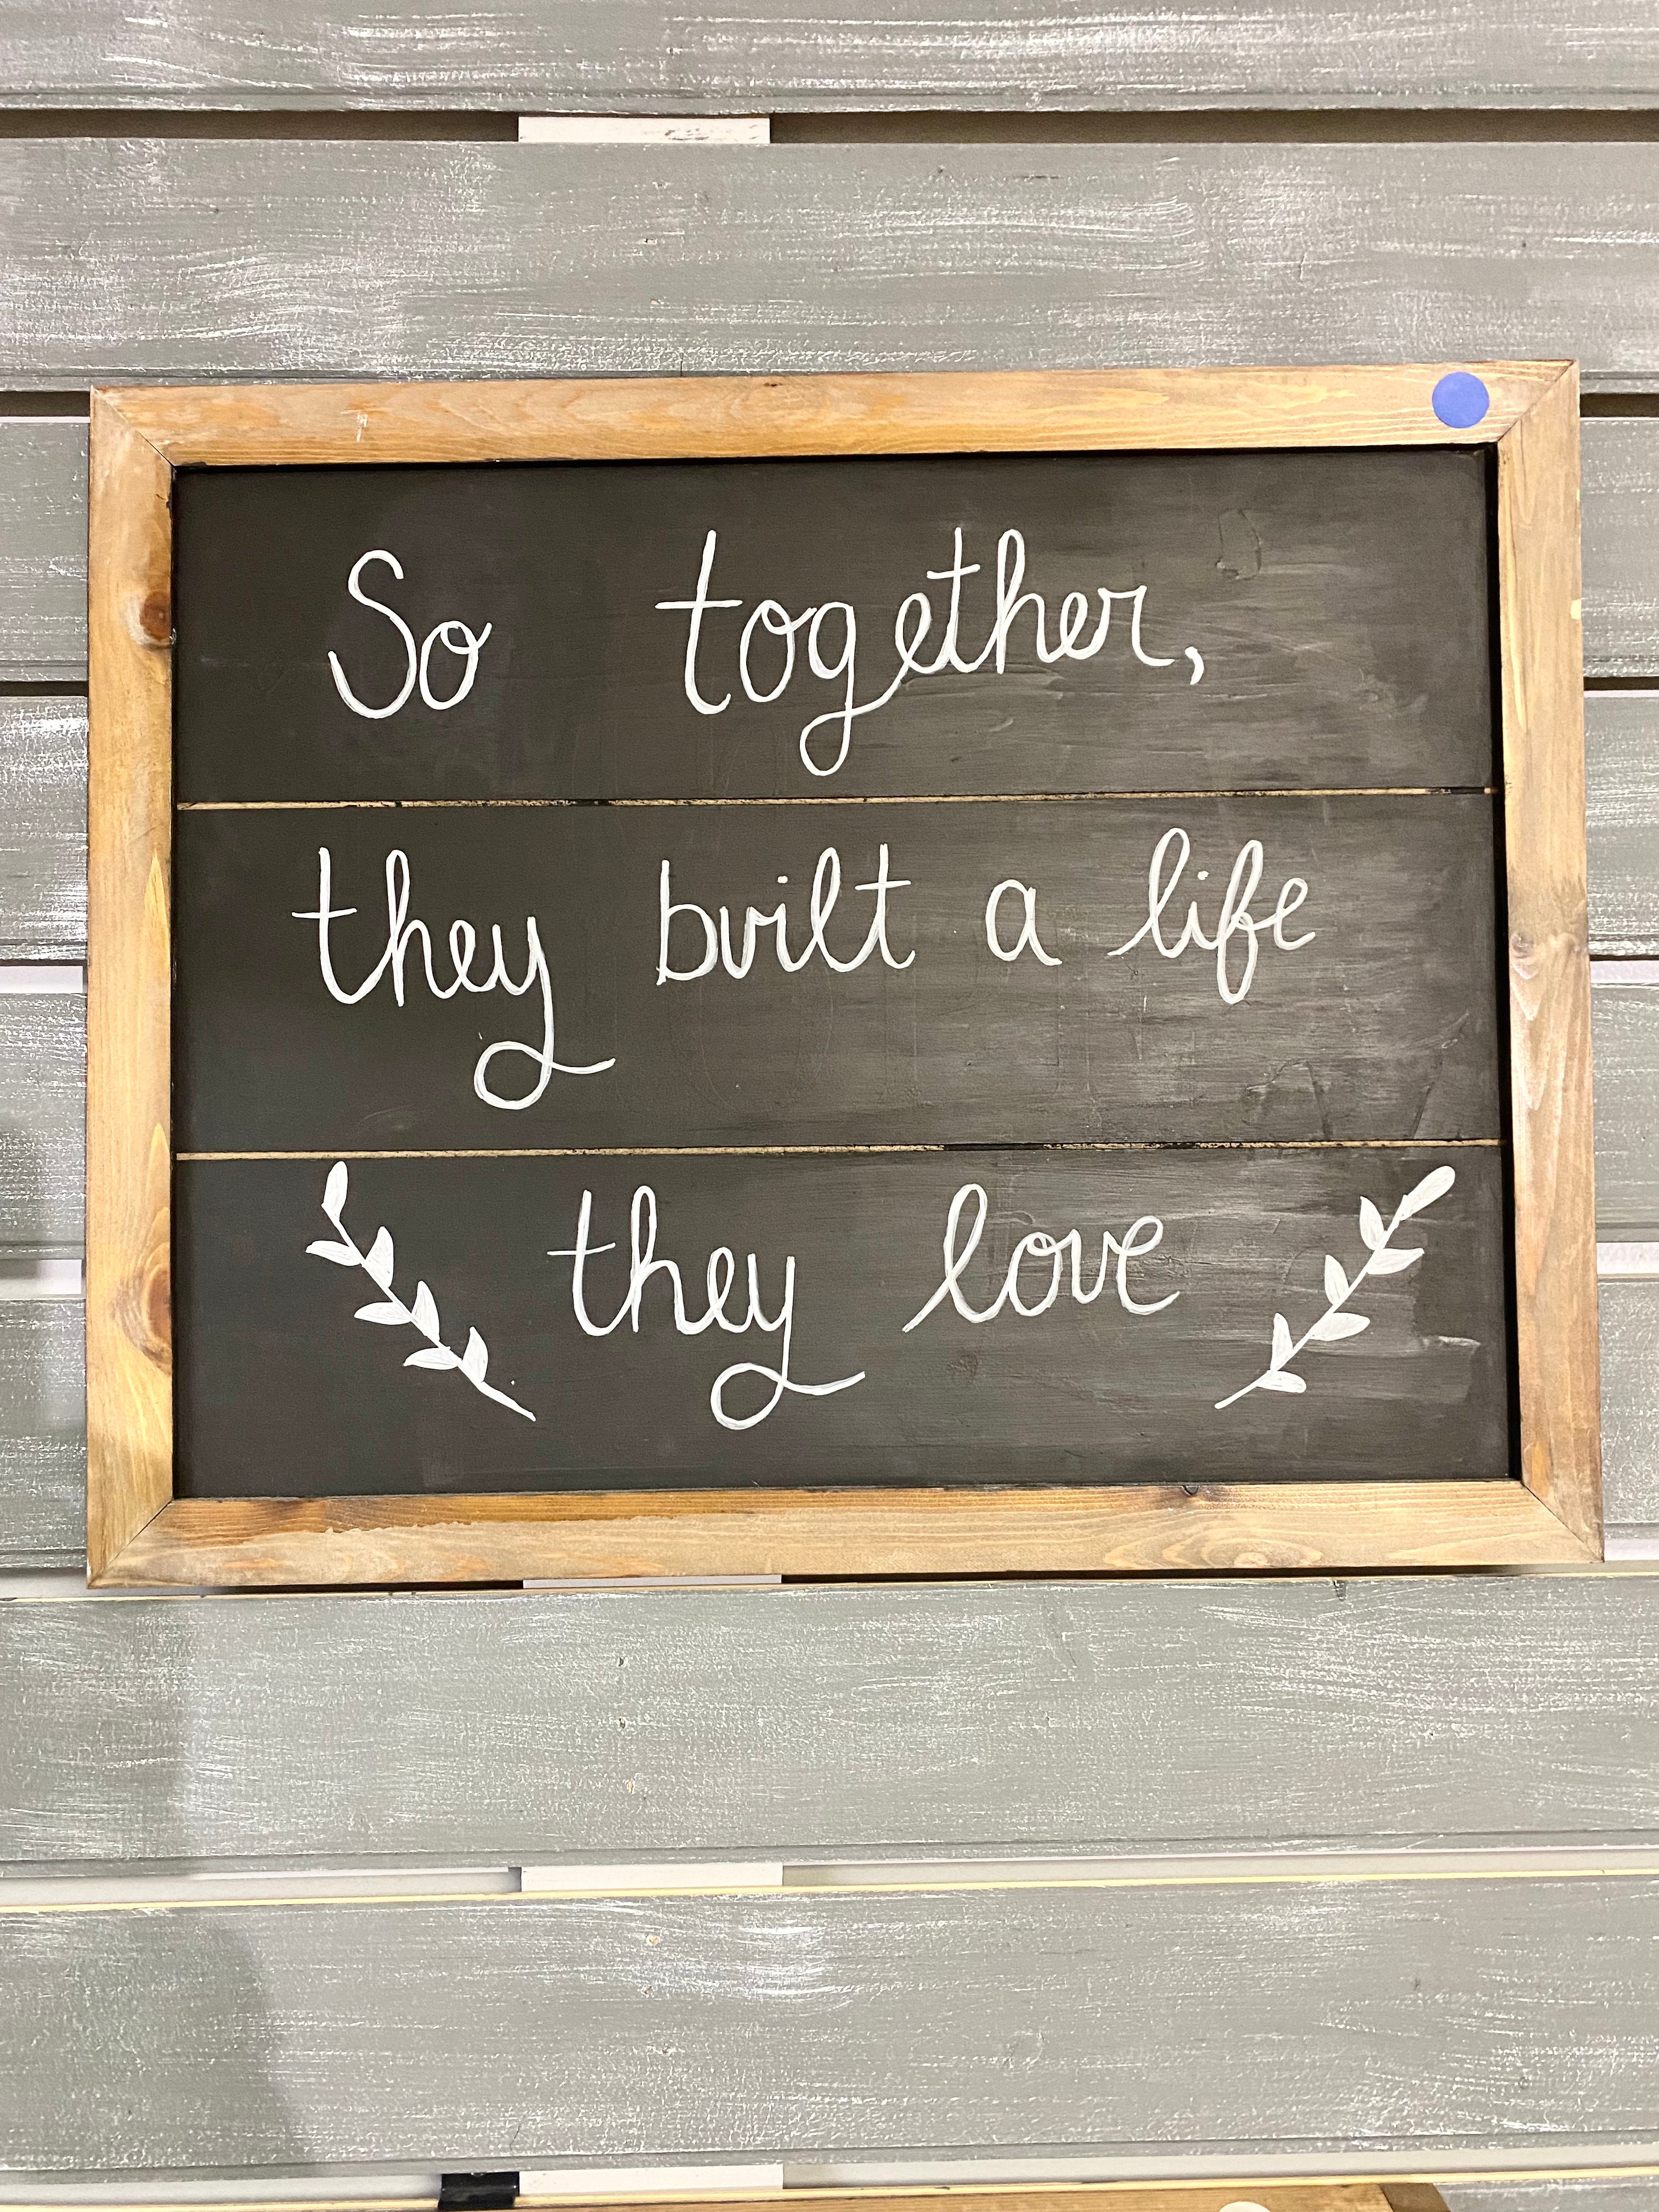 “So together, they built a life they love” chalkboard inspired wall sign